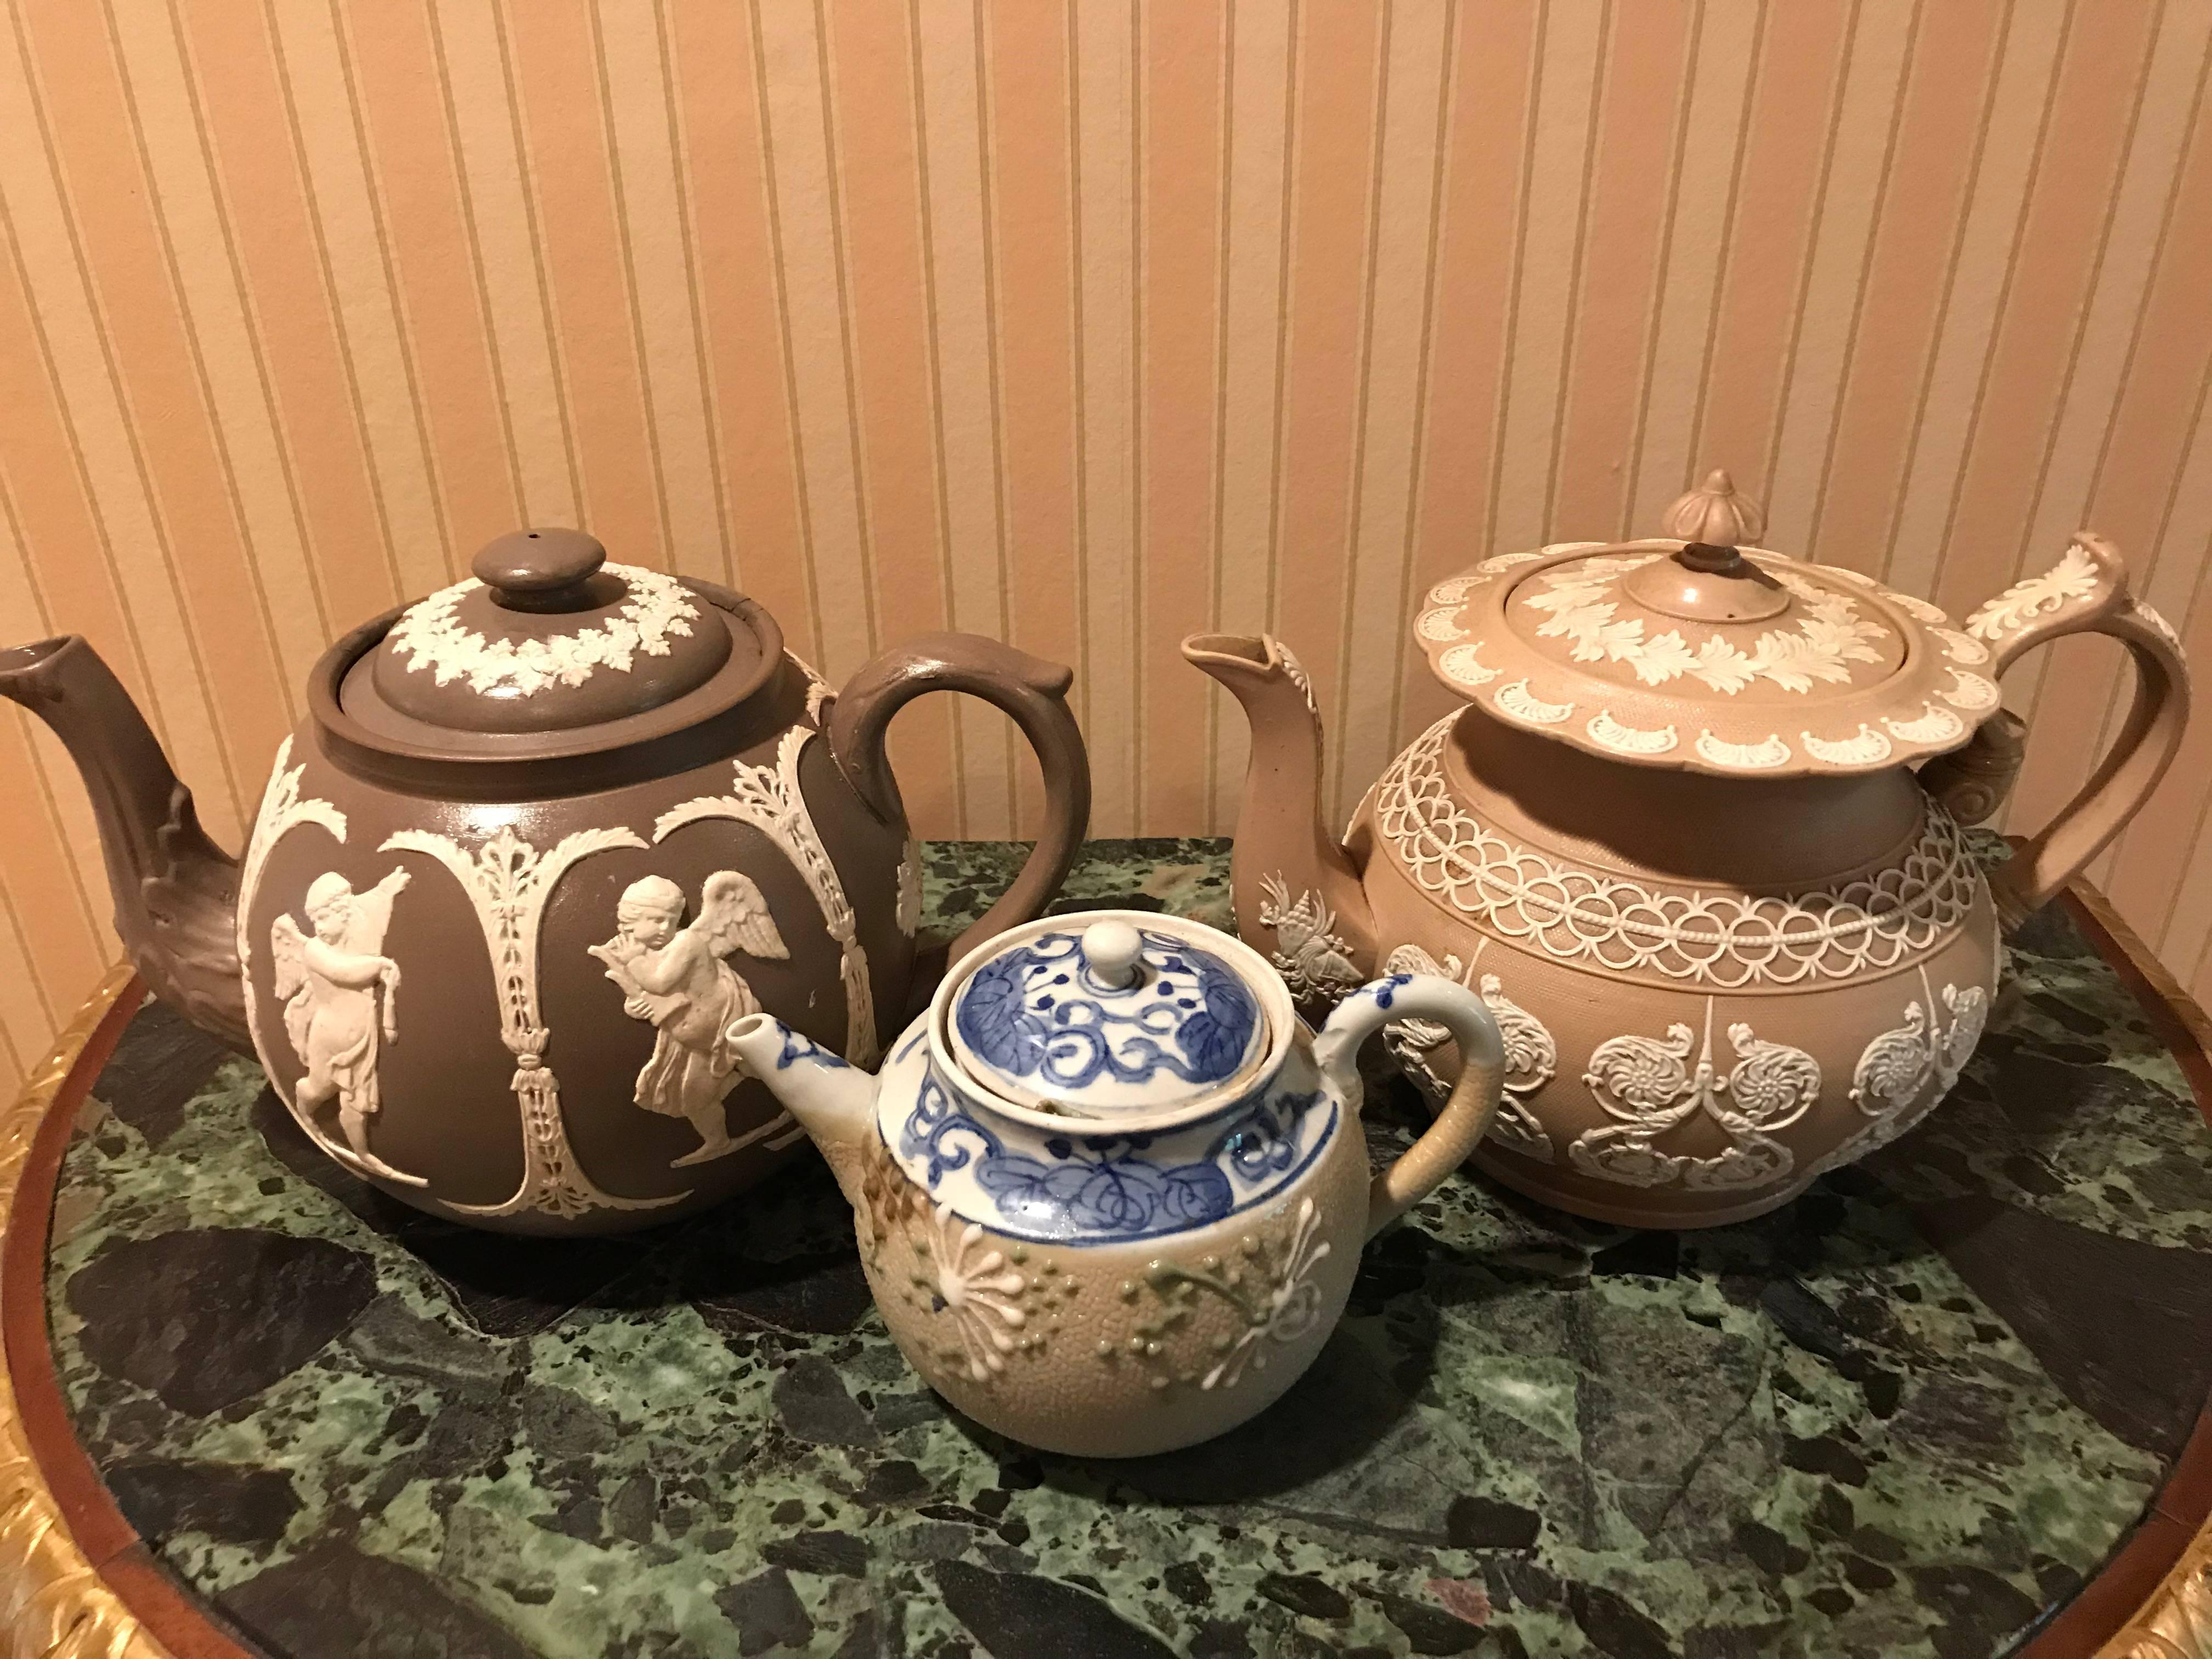 Lot of three English teapots with decorated motfis. Measures: 1) W: 9.5